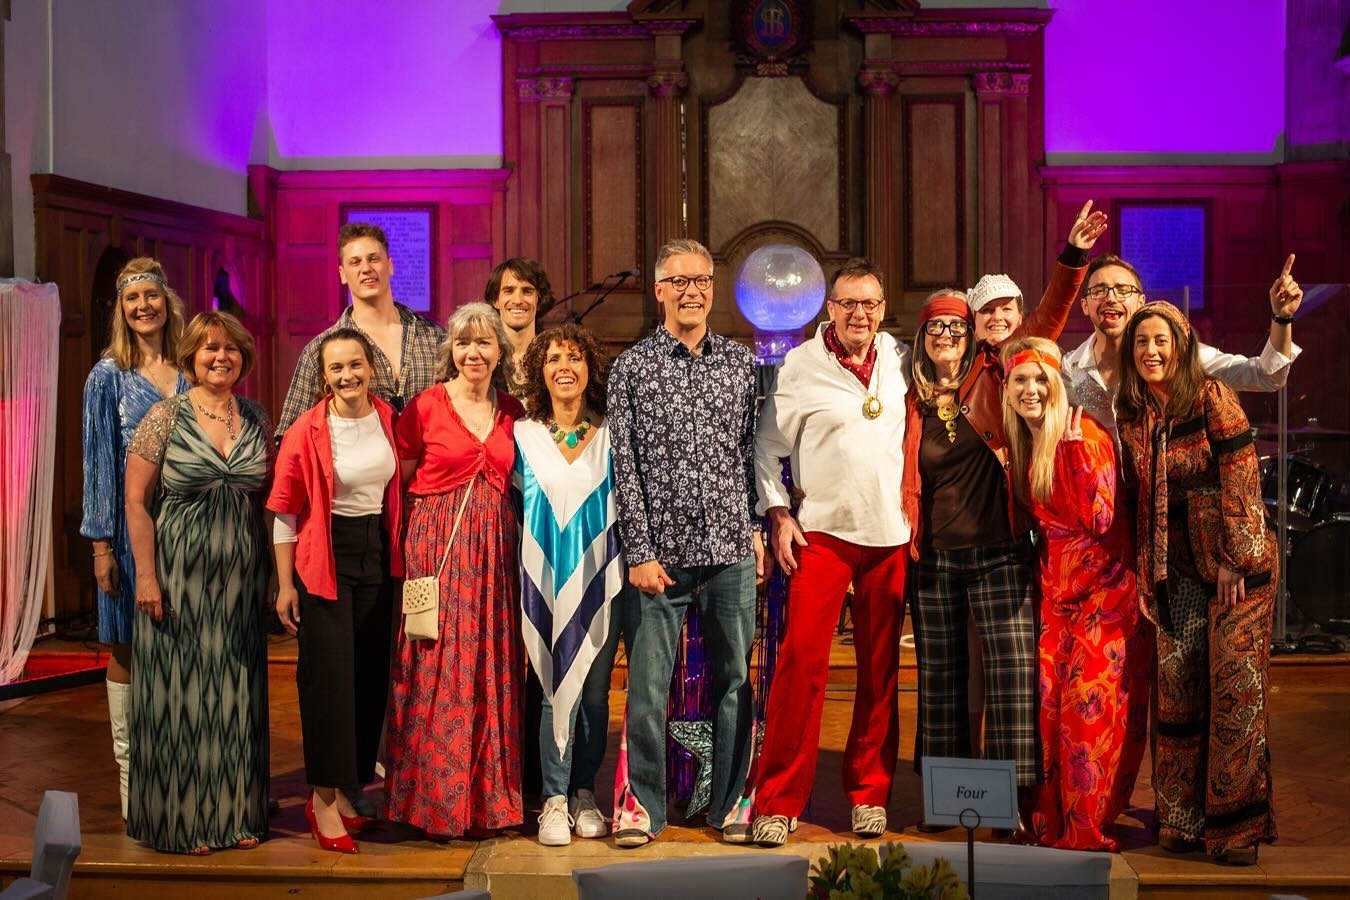 A rare photograph of the staff team in their Saturday best at Mission Possible!
#church #churchstaff #churchofengland #dioceseofsouthwark #sw18 #southfields #wandsworth #charityfundraiser
Photo credit @lightbylexi